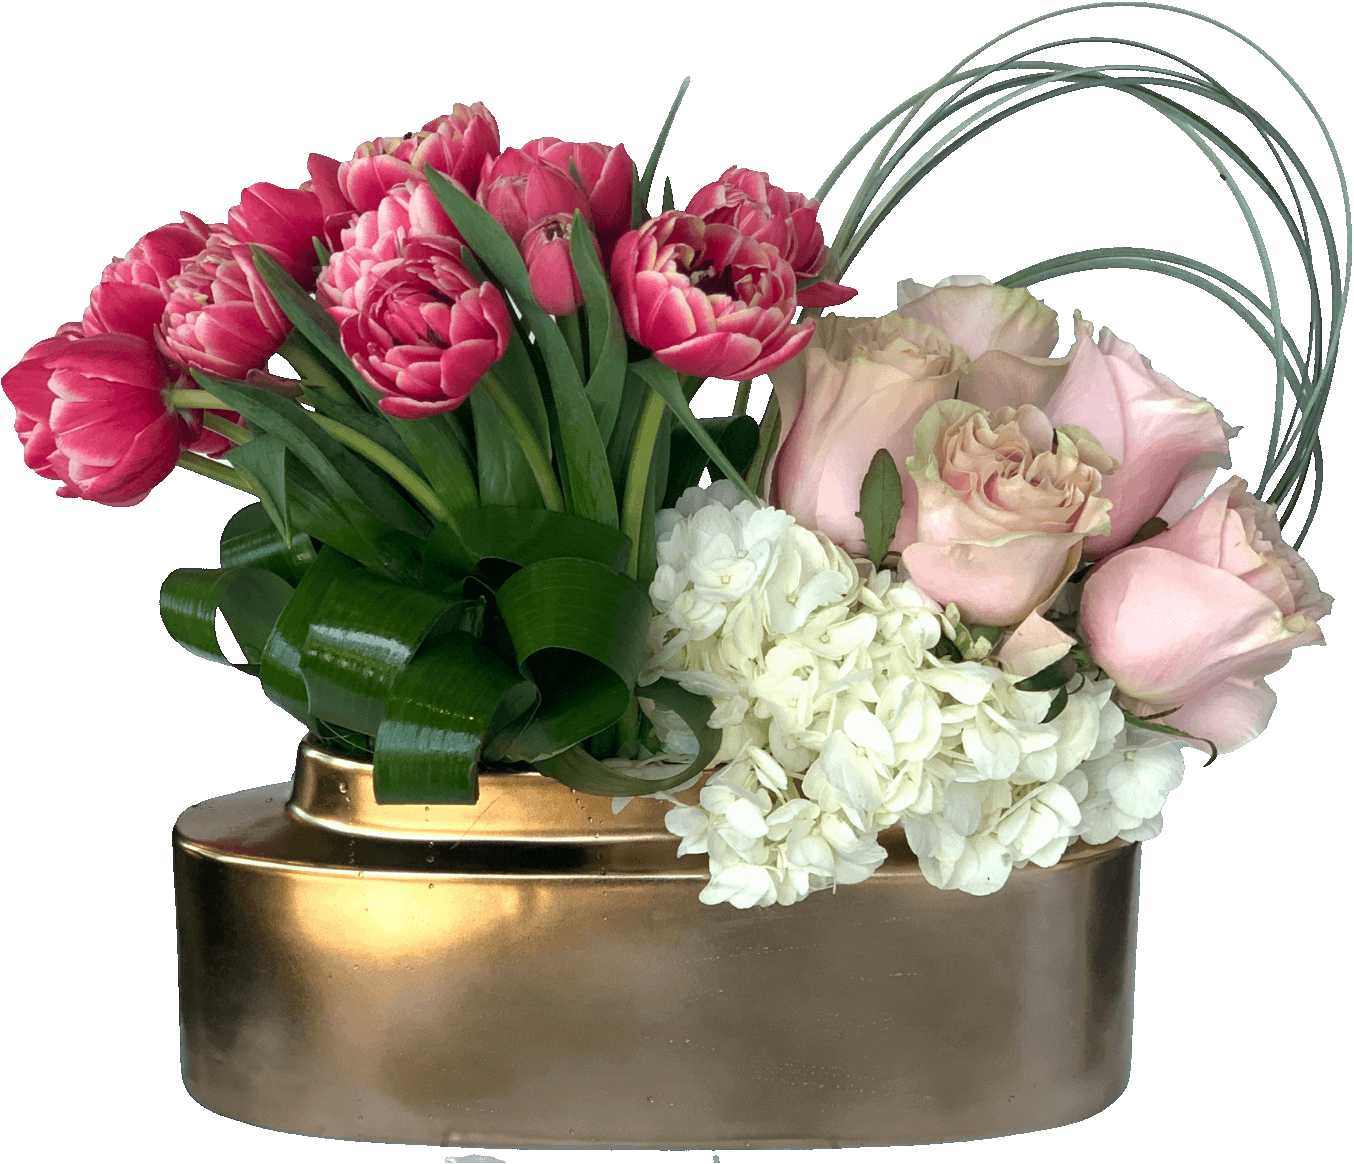 bunch of double pink tulips & light pink roses in vase